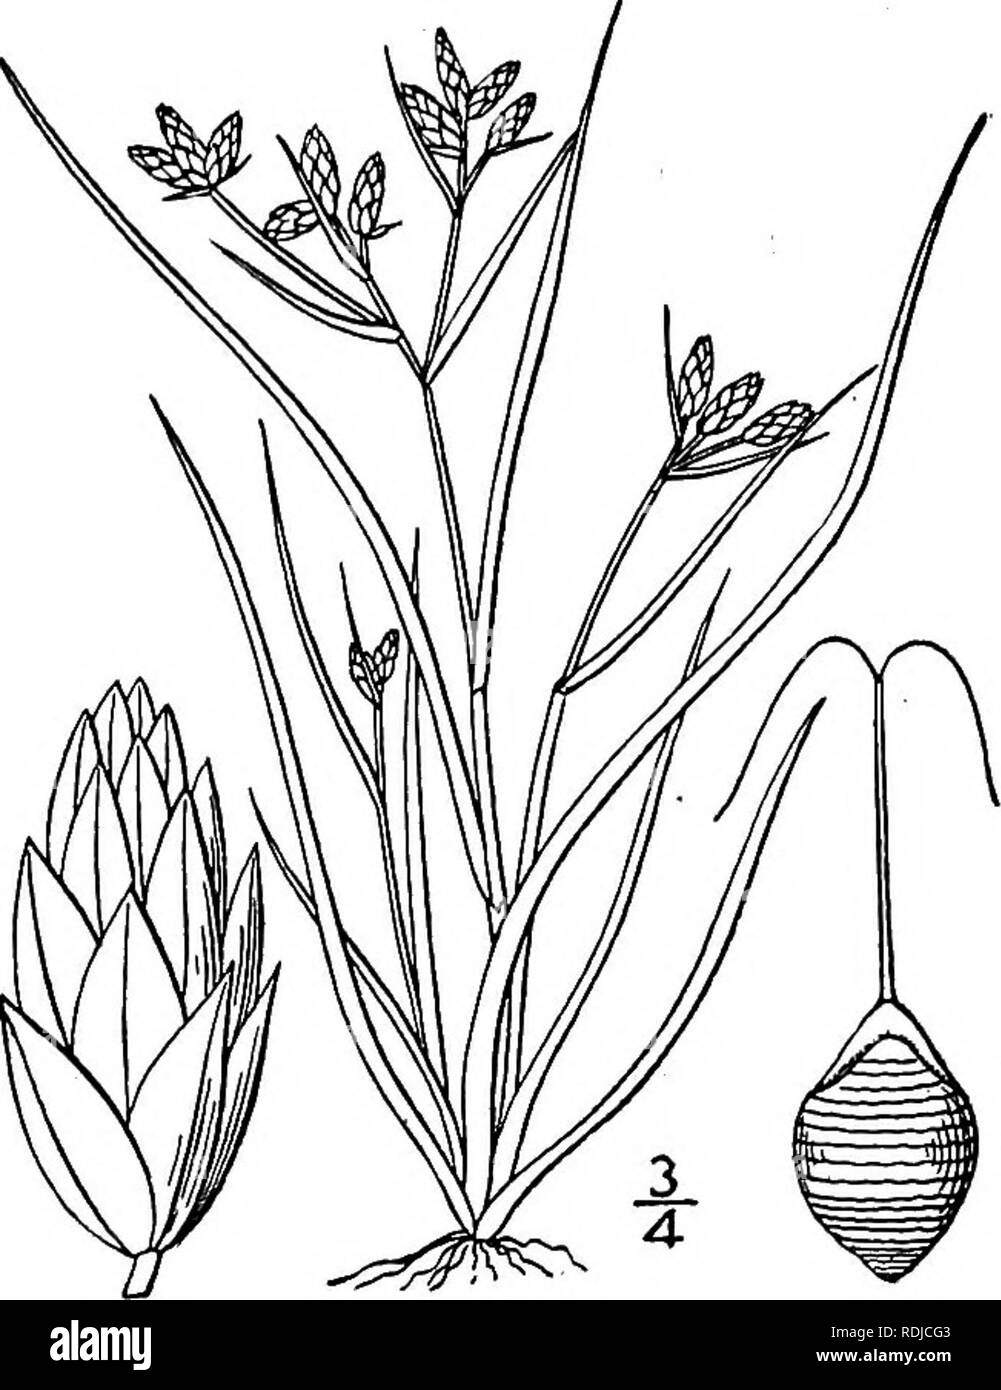 . An illustrated flora of the northern United States, Canada and the British possessions, from Newfoundland to the parallel of the southern boundary of Virginia, and from the Atlantic Ocean westward to the 102d meridian. Botany; Botany. Genus 14. SEDGE FAMILY. 347 1. Psilocarya nitens (Vahl) Wood. Short-beaked Bald-rush. Fig. 855. Scirpus nitens Vahl, Enum. 2: 272. 1806. P. rhynchosporoides Torr. Ann. Lye. N. Y. 3: 361. 1836. Rhynchospora nitens A. Gray, Man. Ed. 5, 568. 1867. Psilocarya nitens Wood, Bot. &amp; Fl. 364. 1870. Glabrous, culms tufted, slightly angled, 3'-2° tall. Leaves narrowly Stock Photo